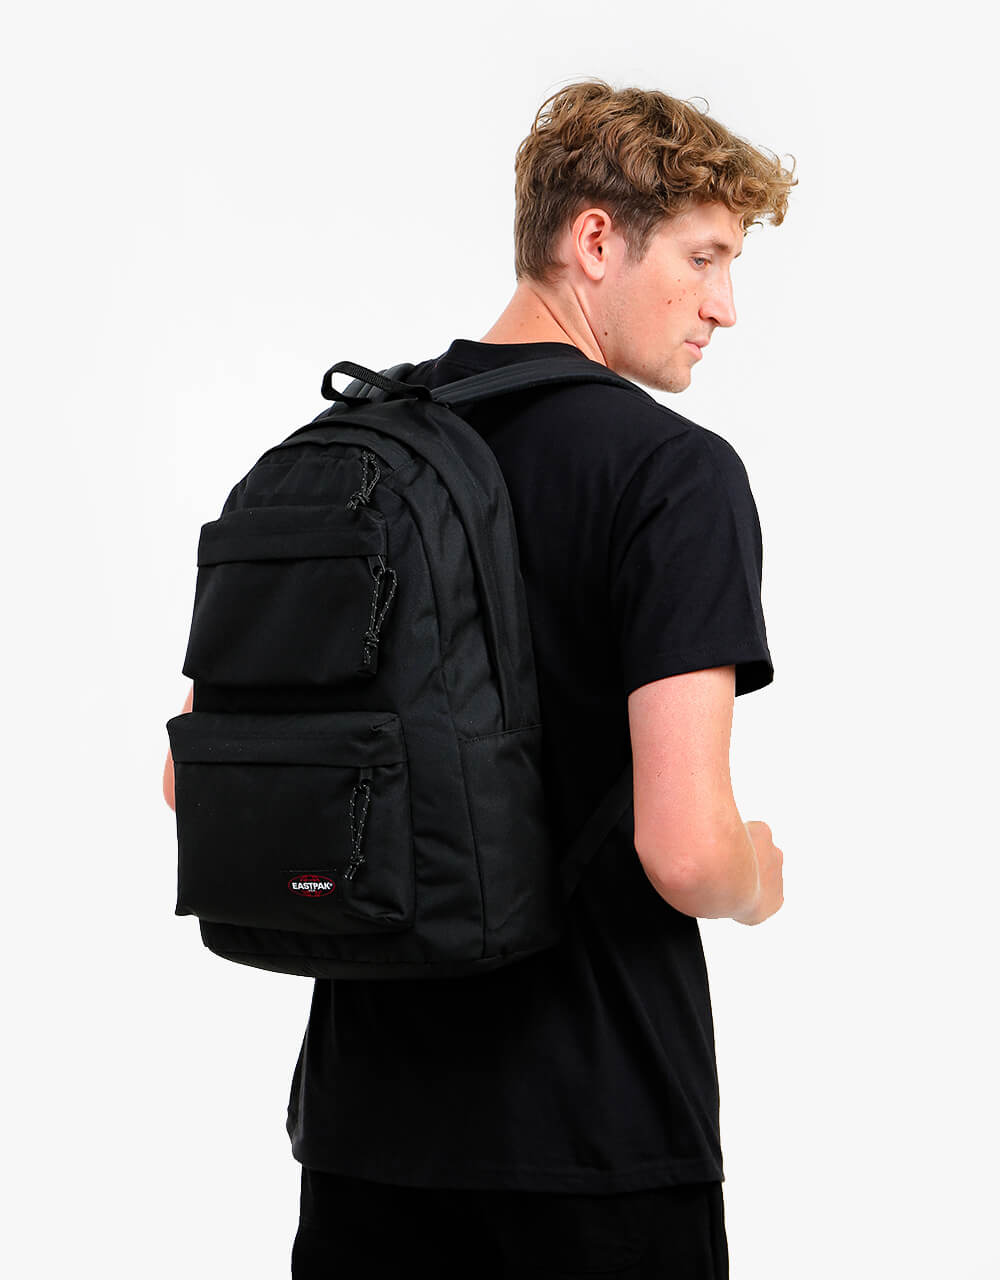 Eastpak Padded Double Backpack - Black – Route One